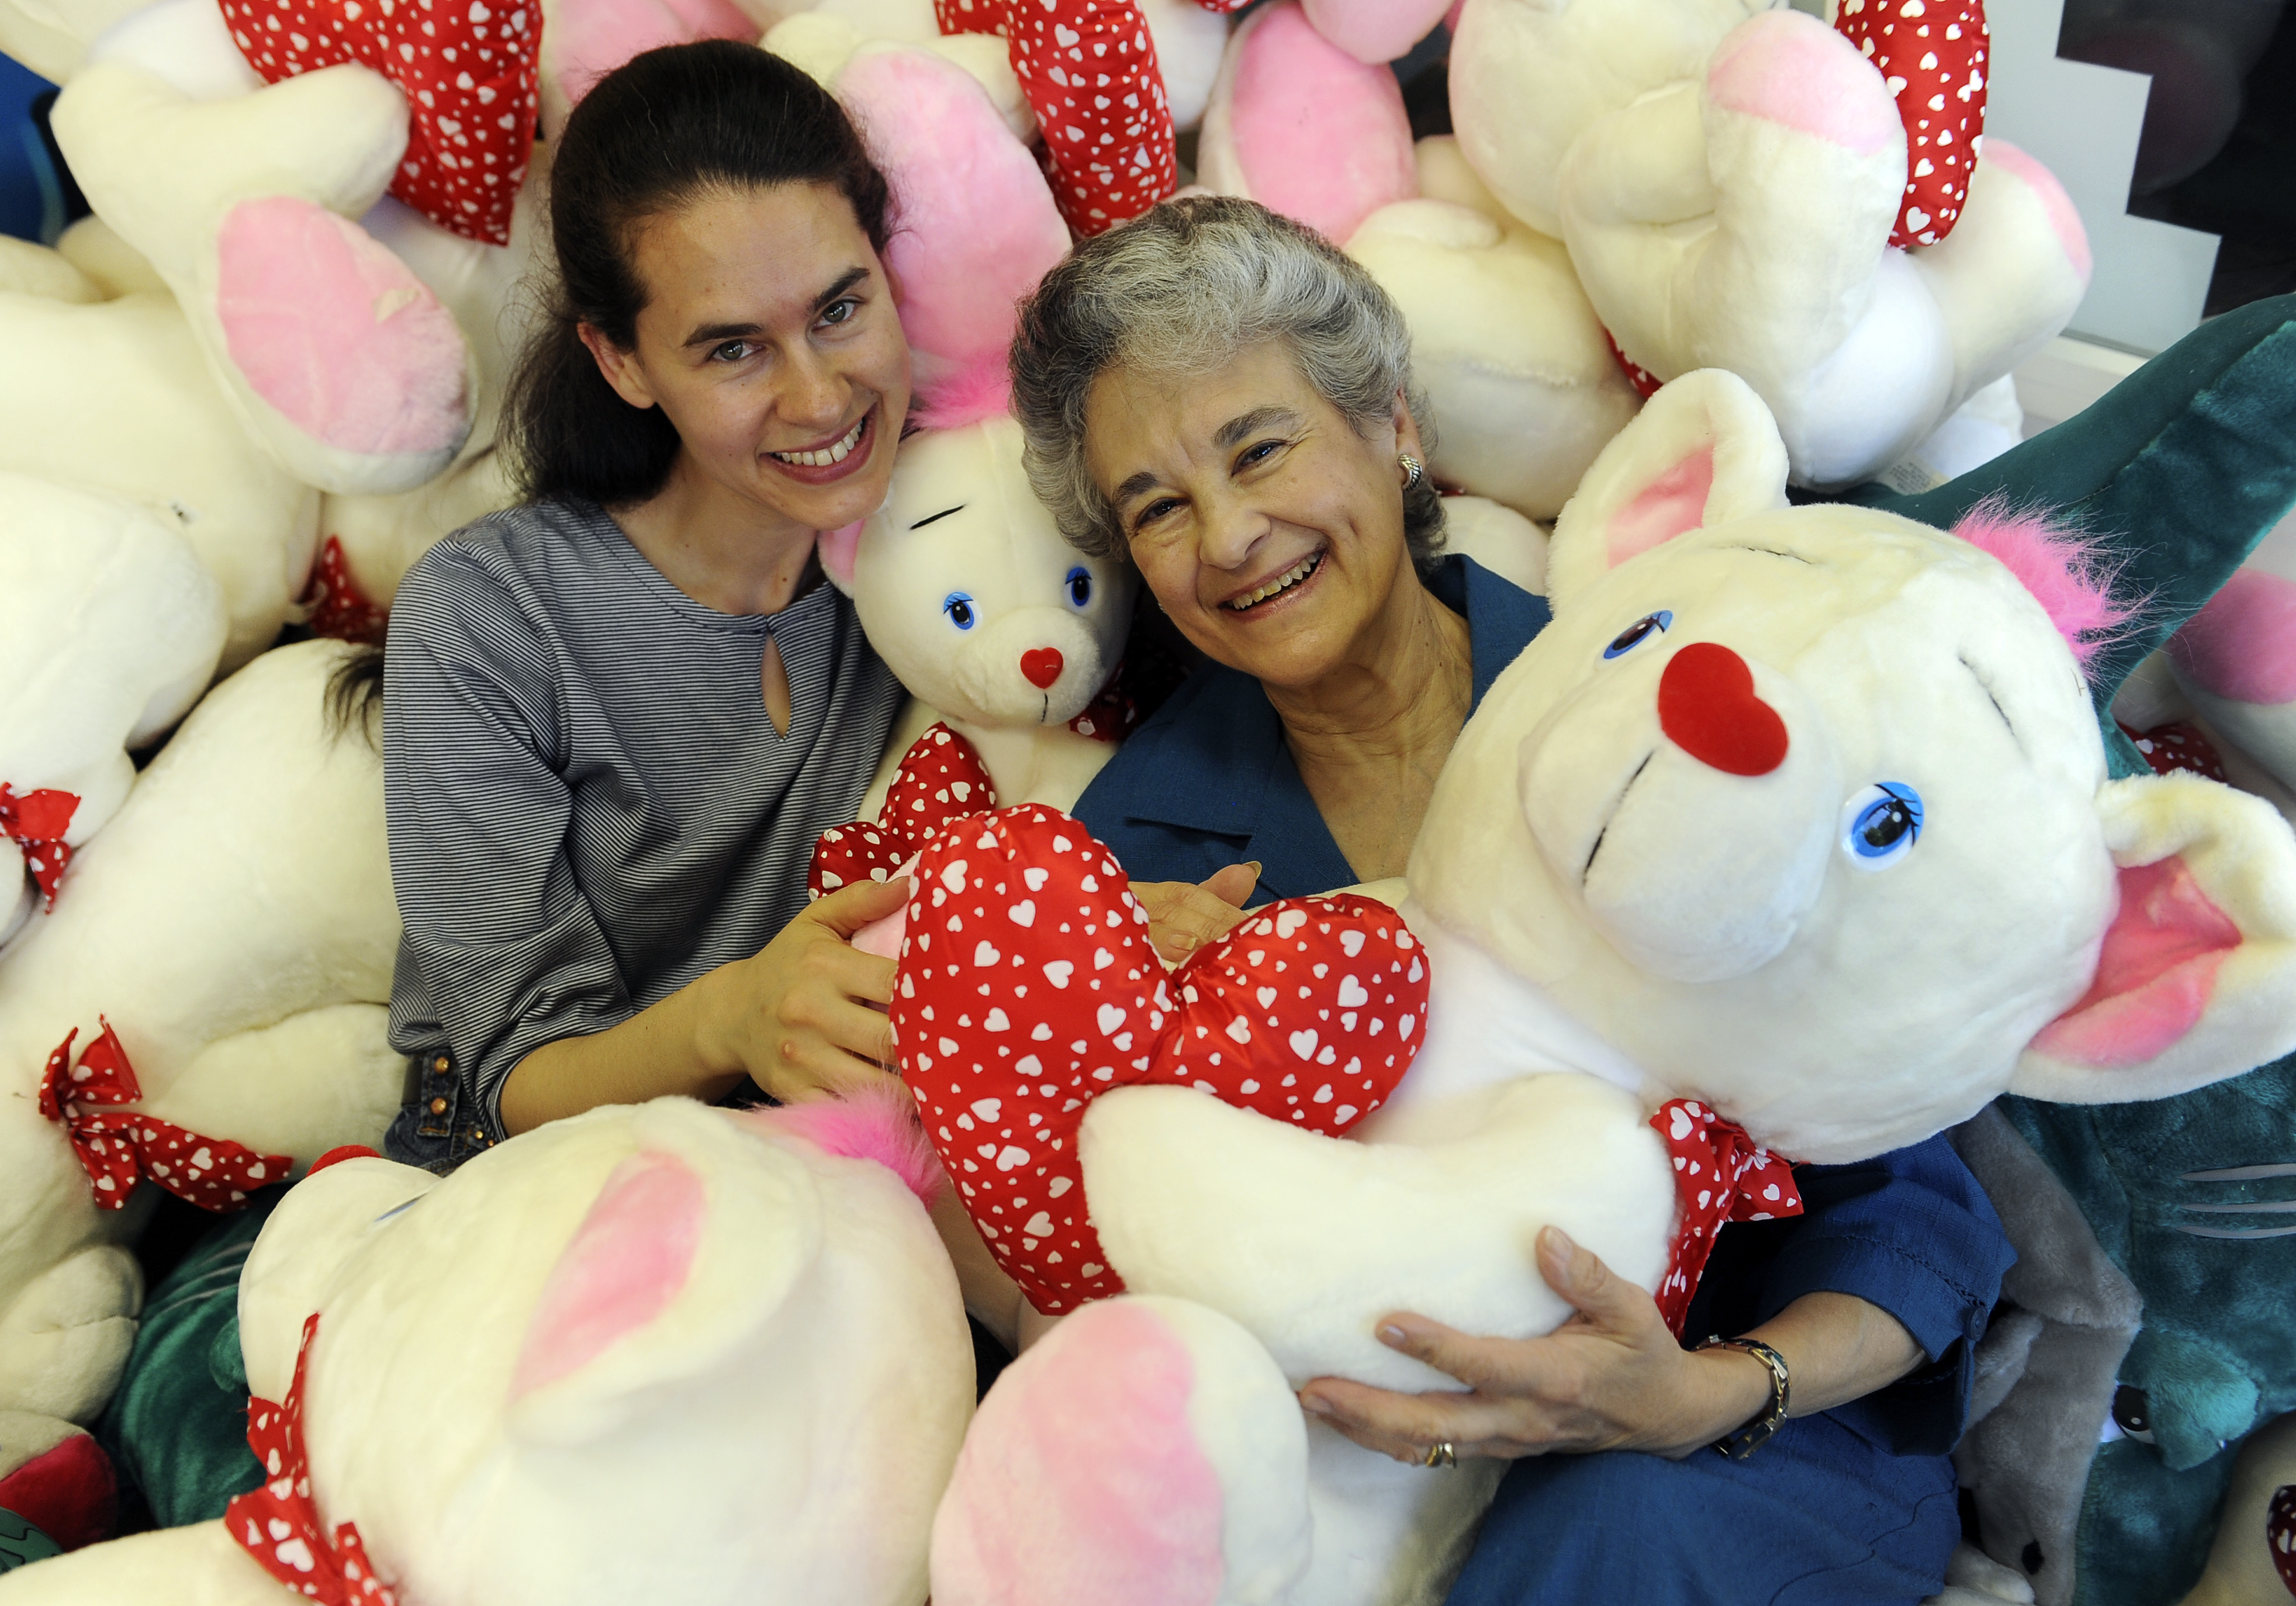 Brenda Fishman, left, and her mother Rhoda Krasner, right, cuddled with prizes inside a game on Friday night, June 24, 2011. (Karl Gehring/ The Denver Post)